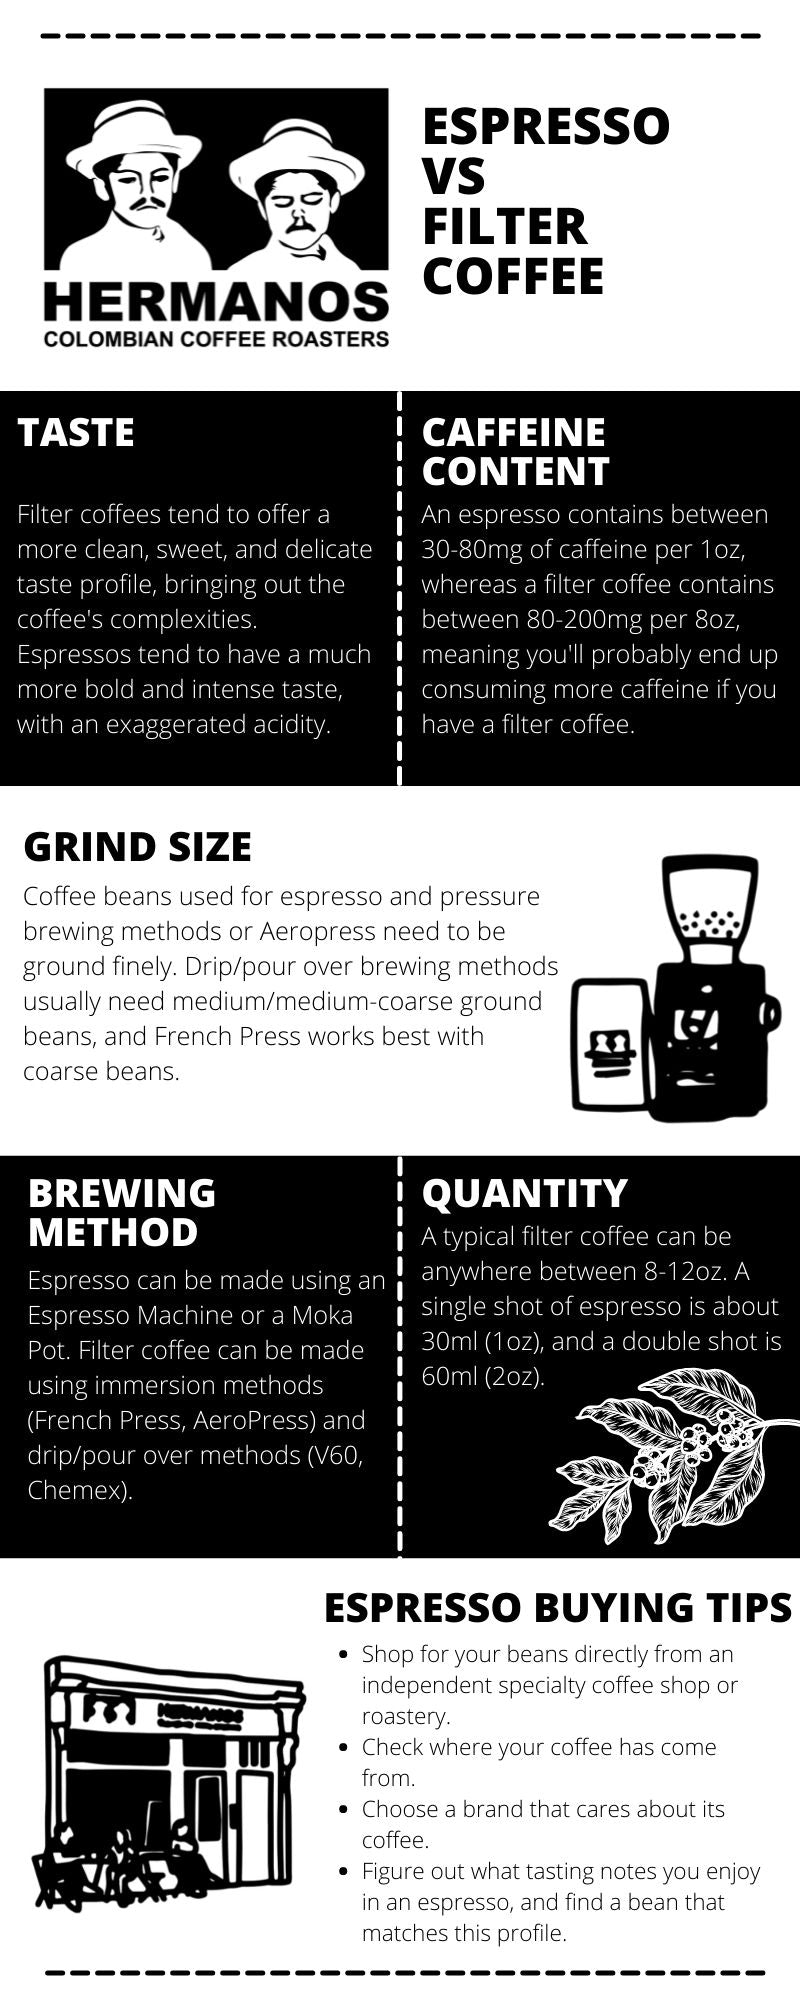 Stay awake with L'OR Espresso: the strongest coffees